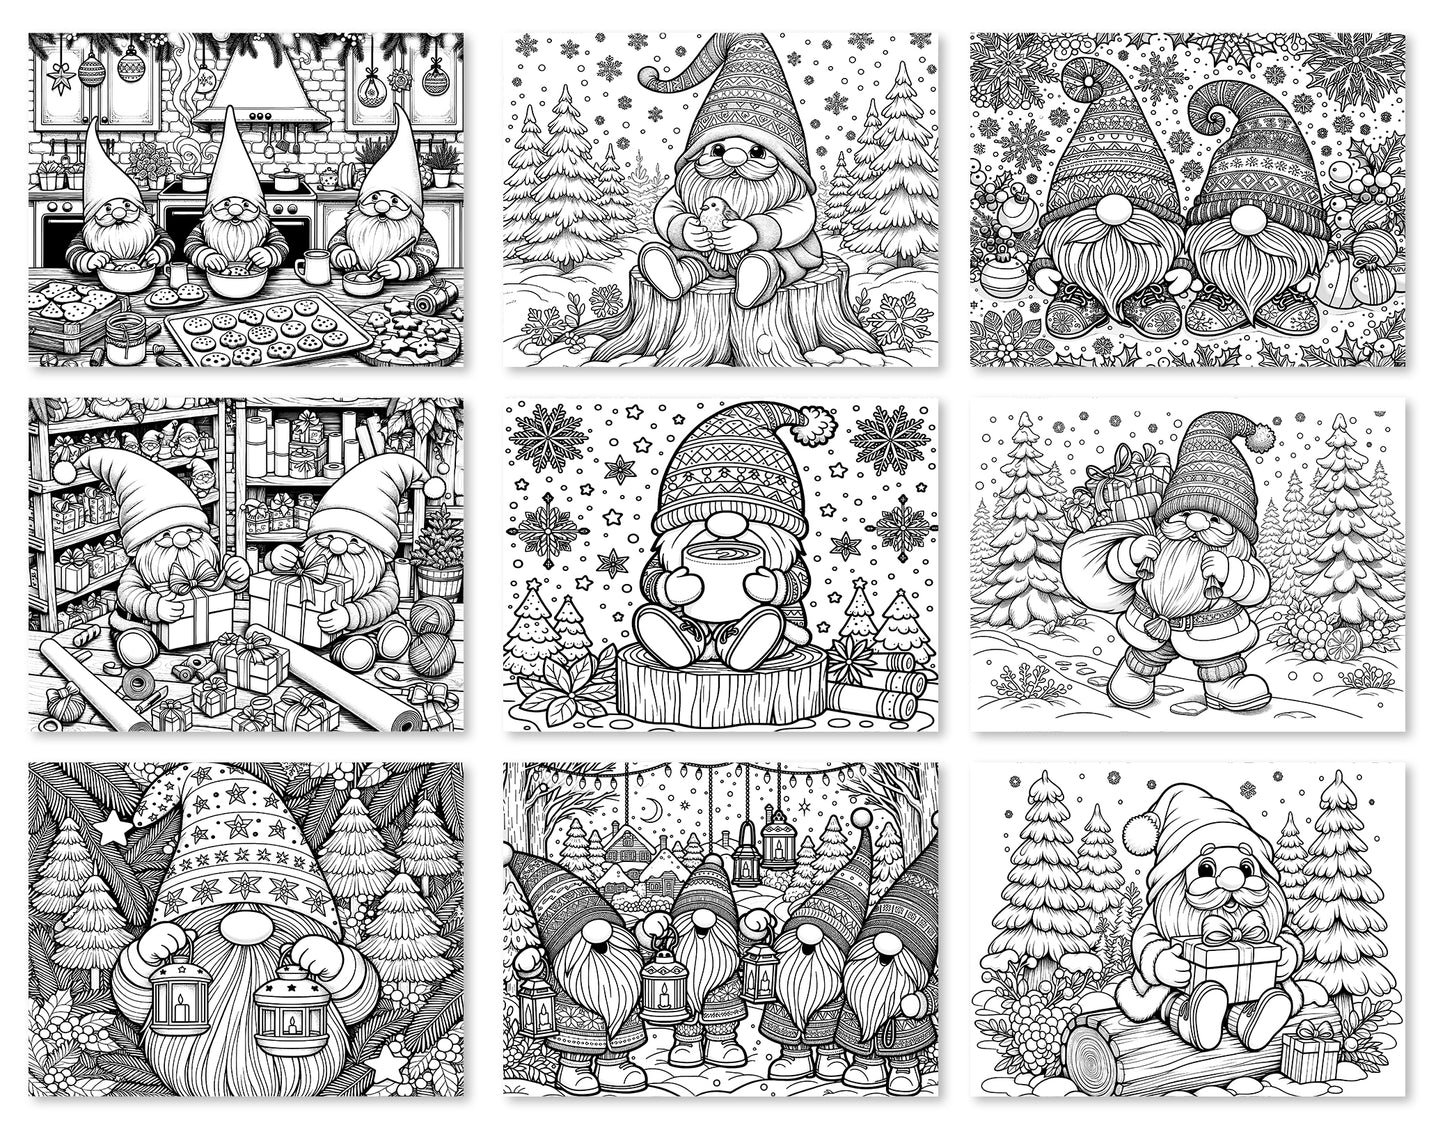 50 Christmas Gnomes Coloring Pages - Instant Download - Printable